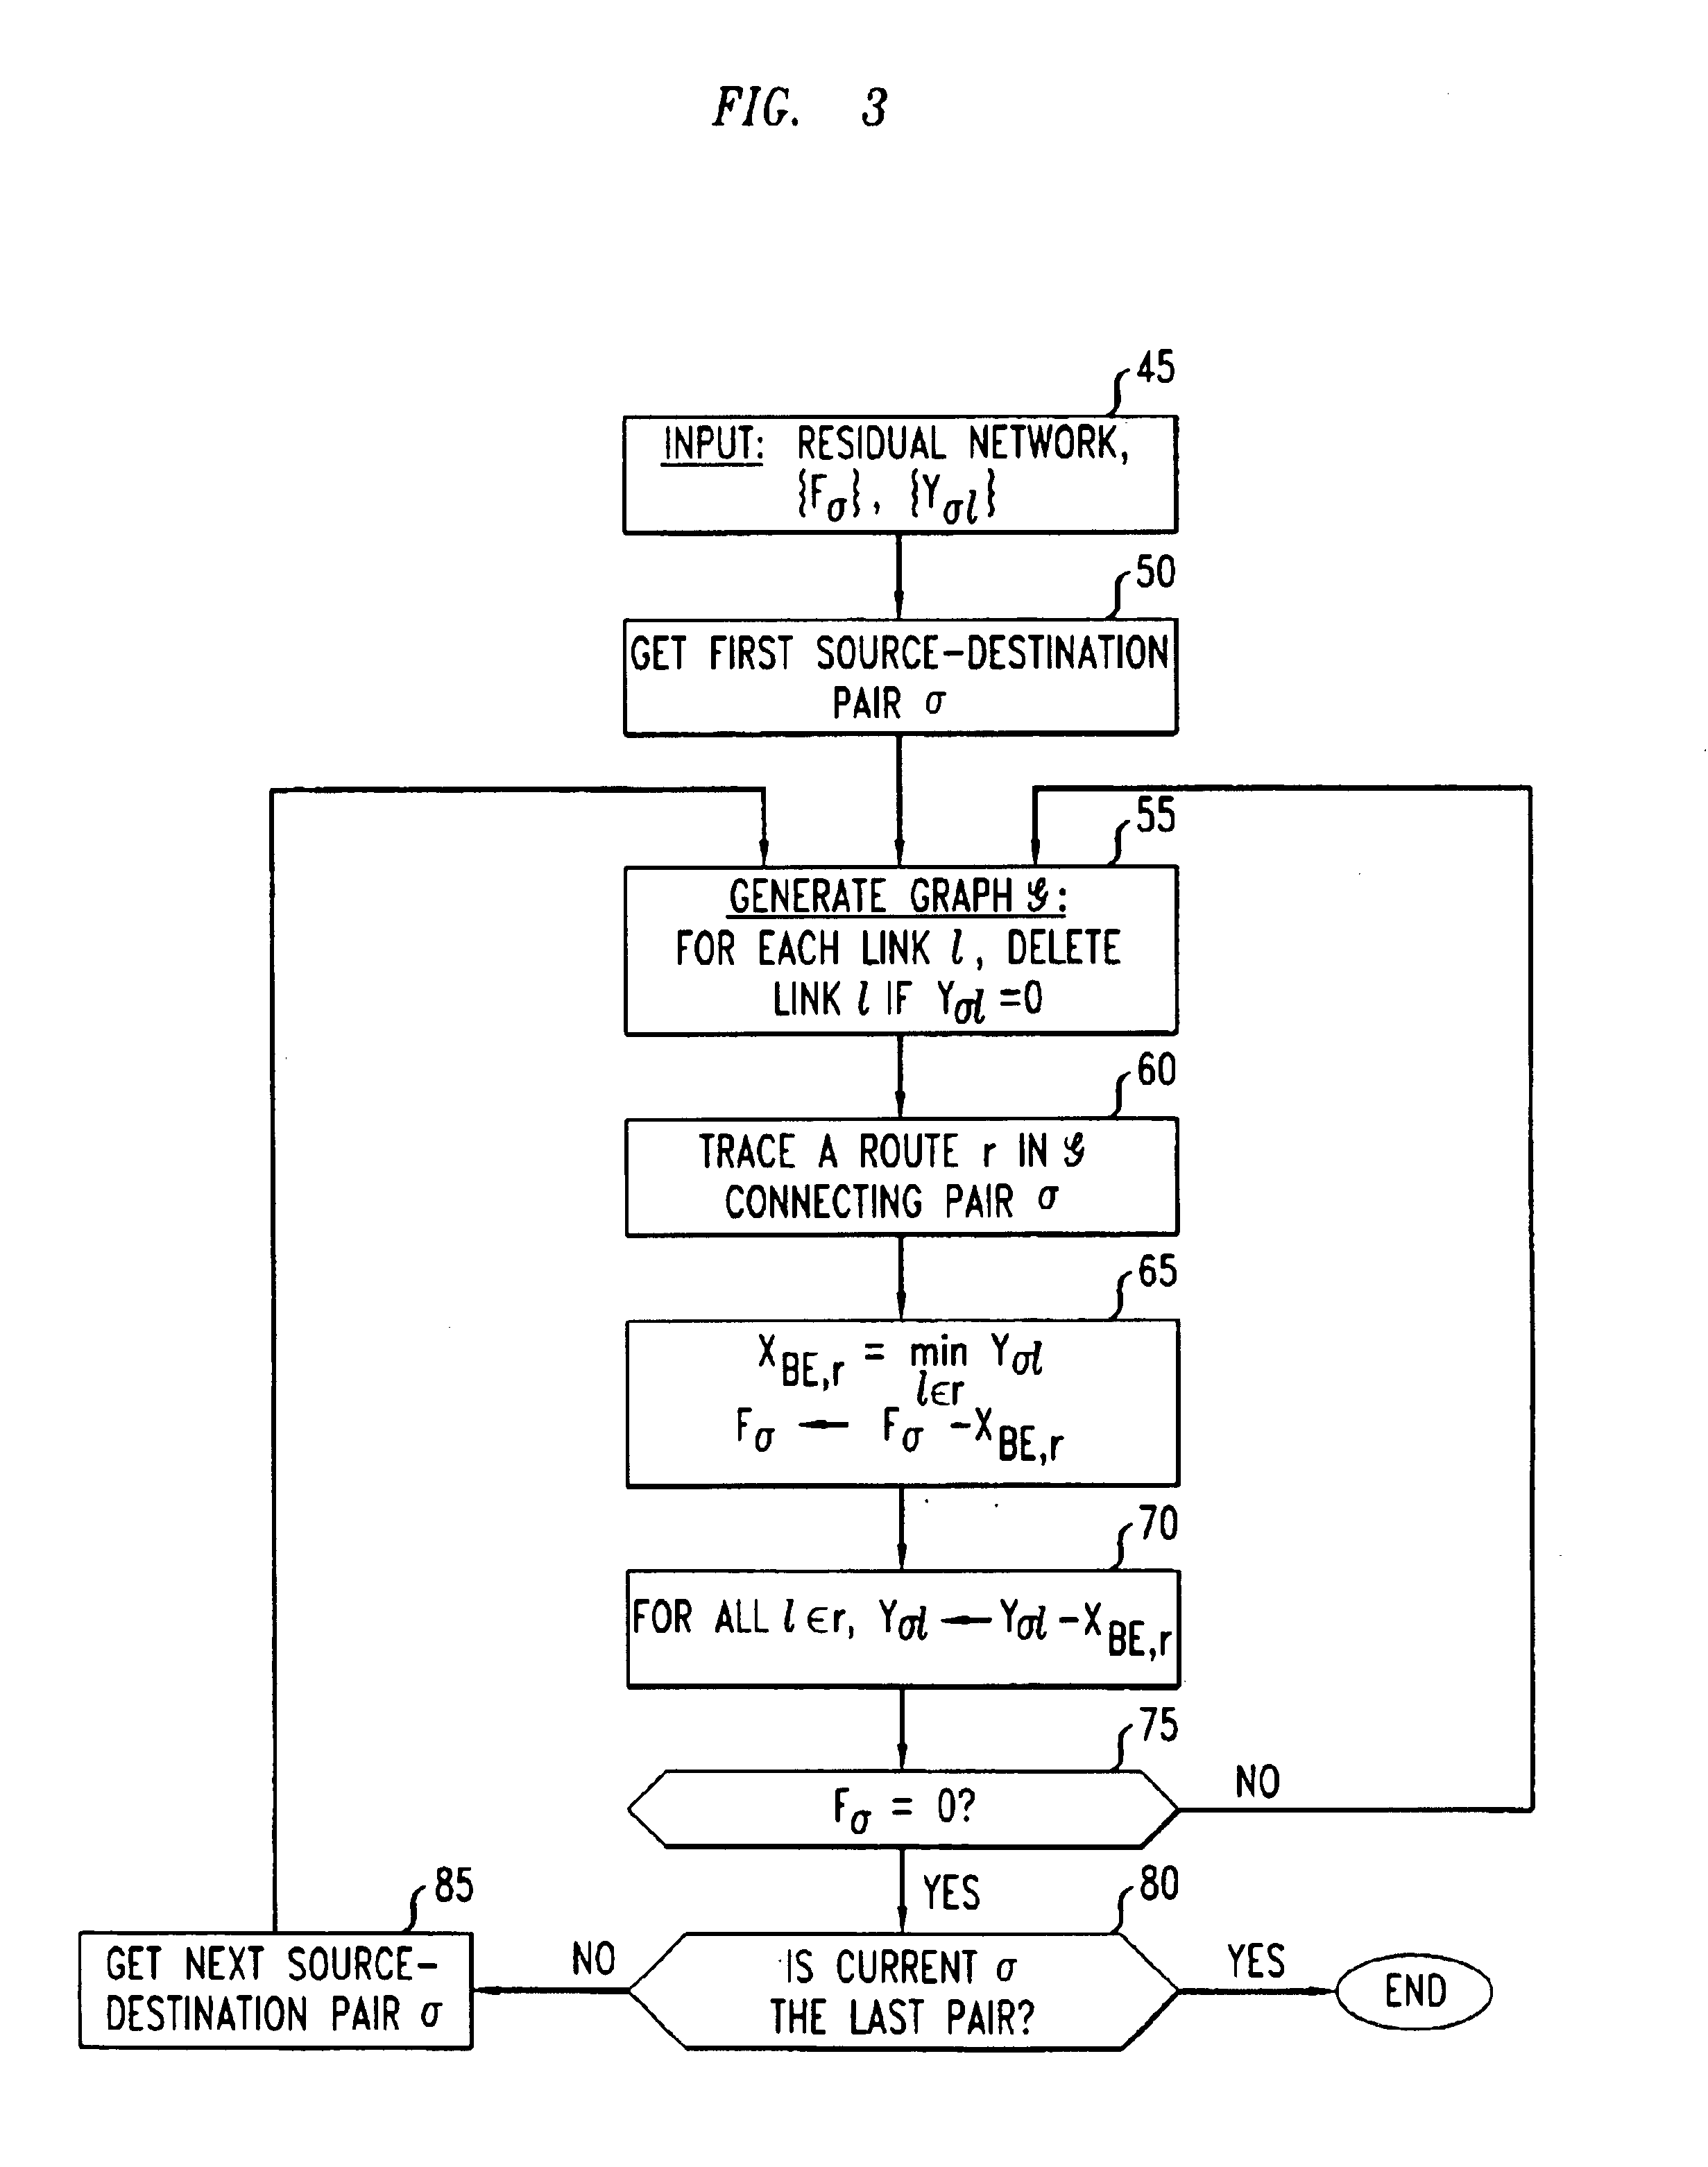 Multicommodity flow method for designing traffic distribution on a multiple-service packetized network